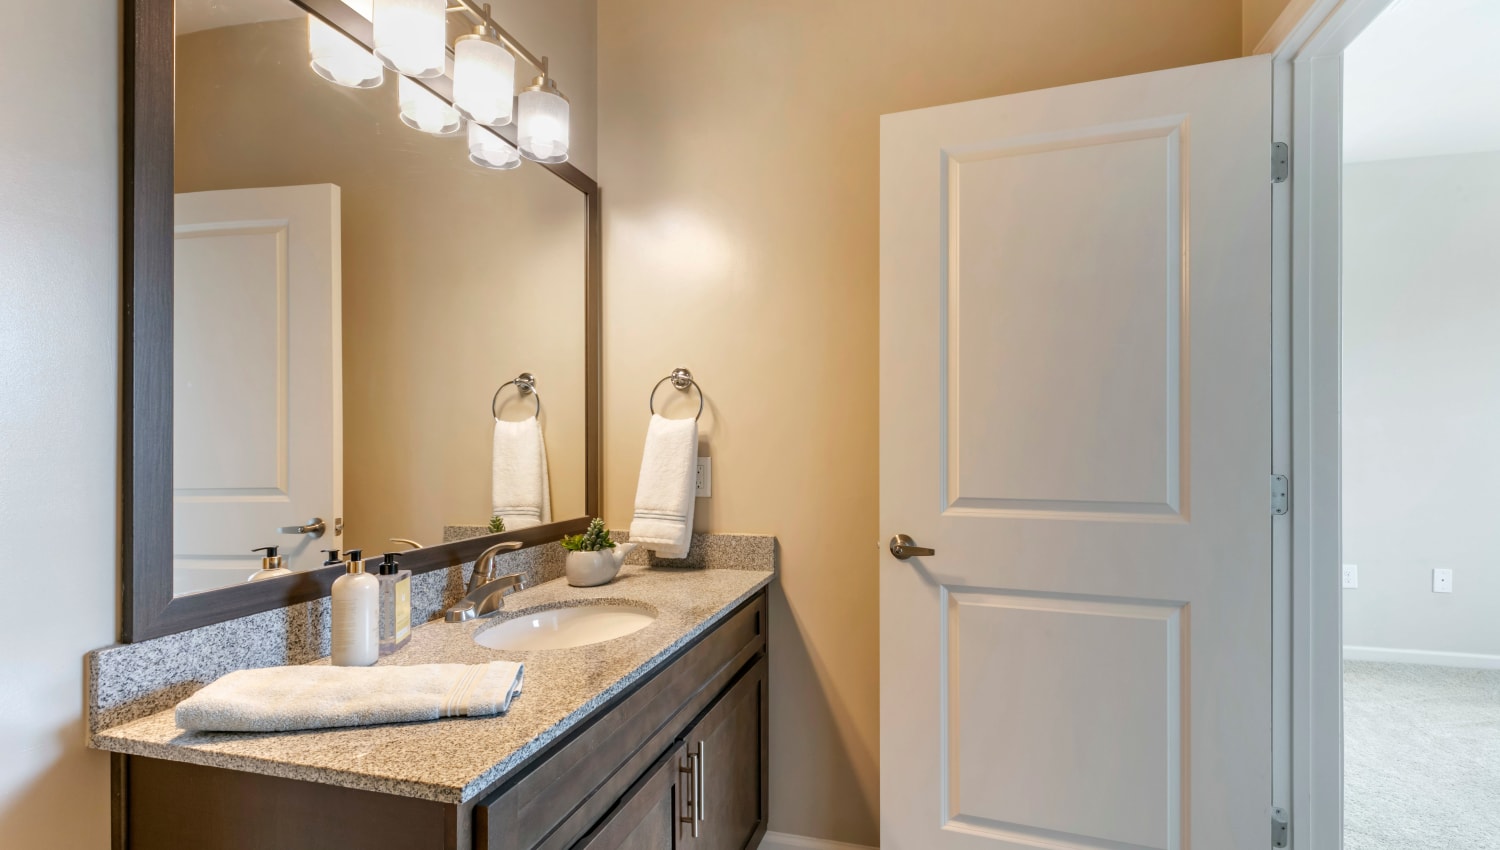 Bathroom with oversized vanity with custom cabinetry and granite countertop at The Village at Apison Pike in Ooltewah, Tennessee